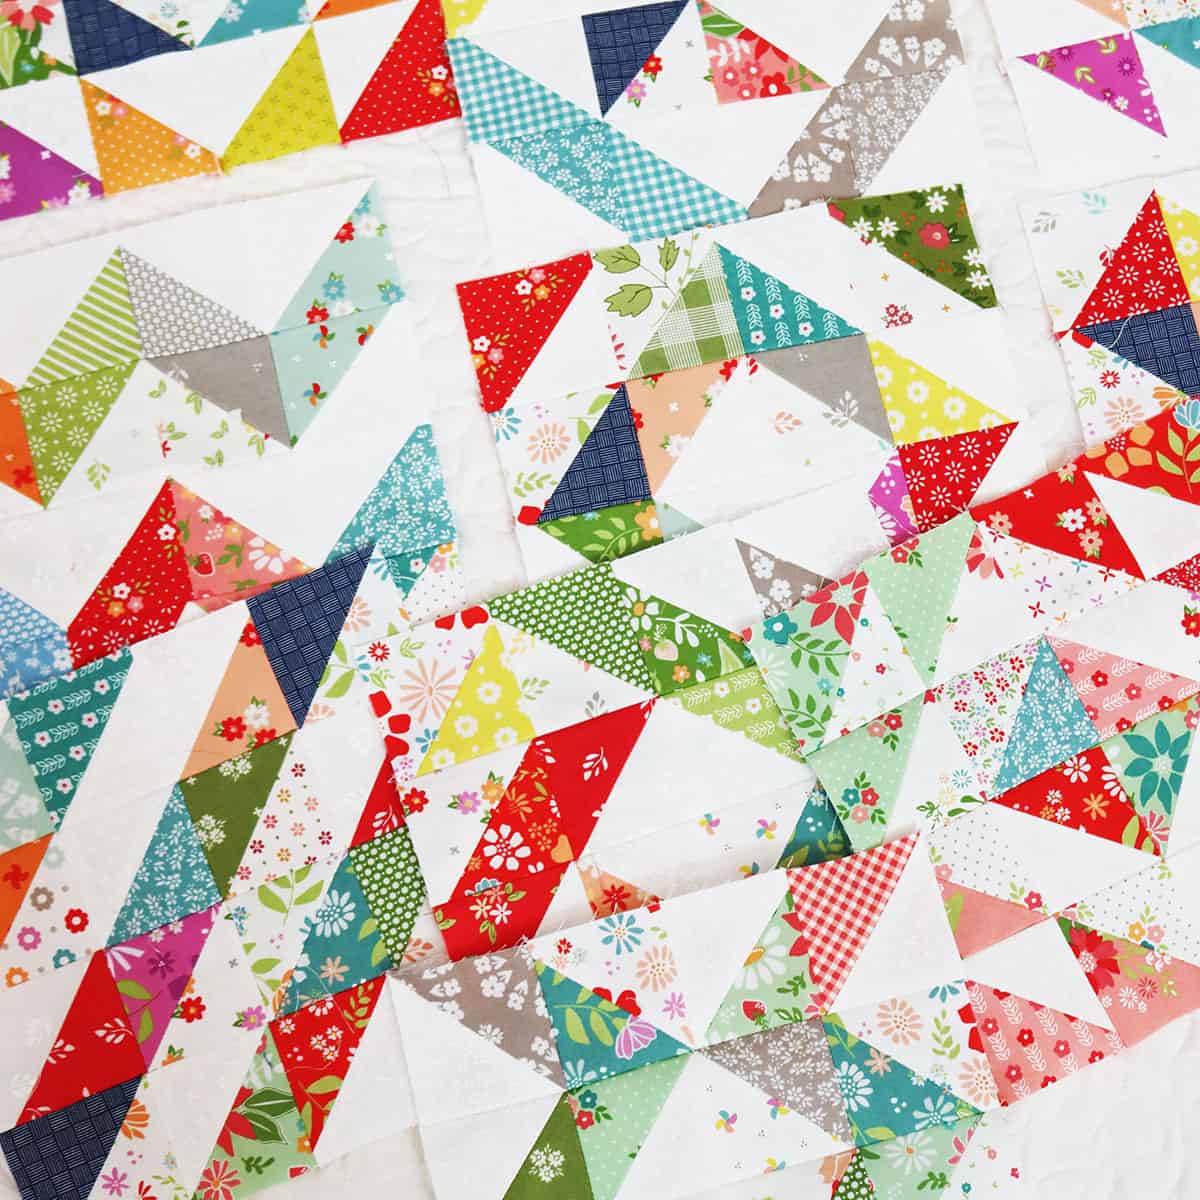 Scrappy Half Square Triangle Blocks by Sherri from A Quilting Life